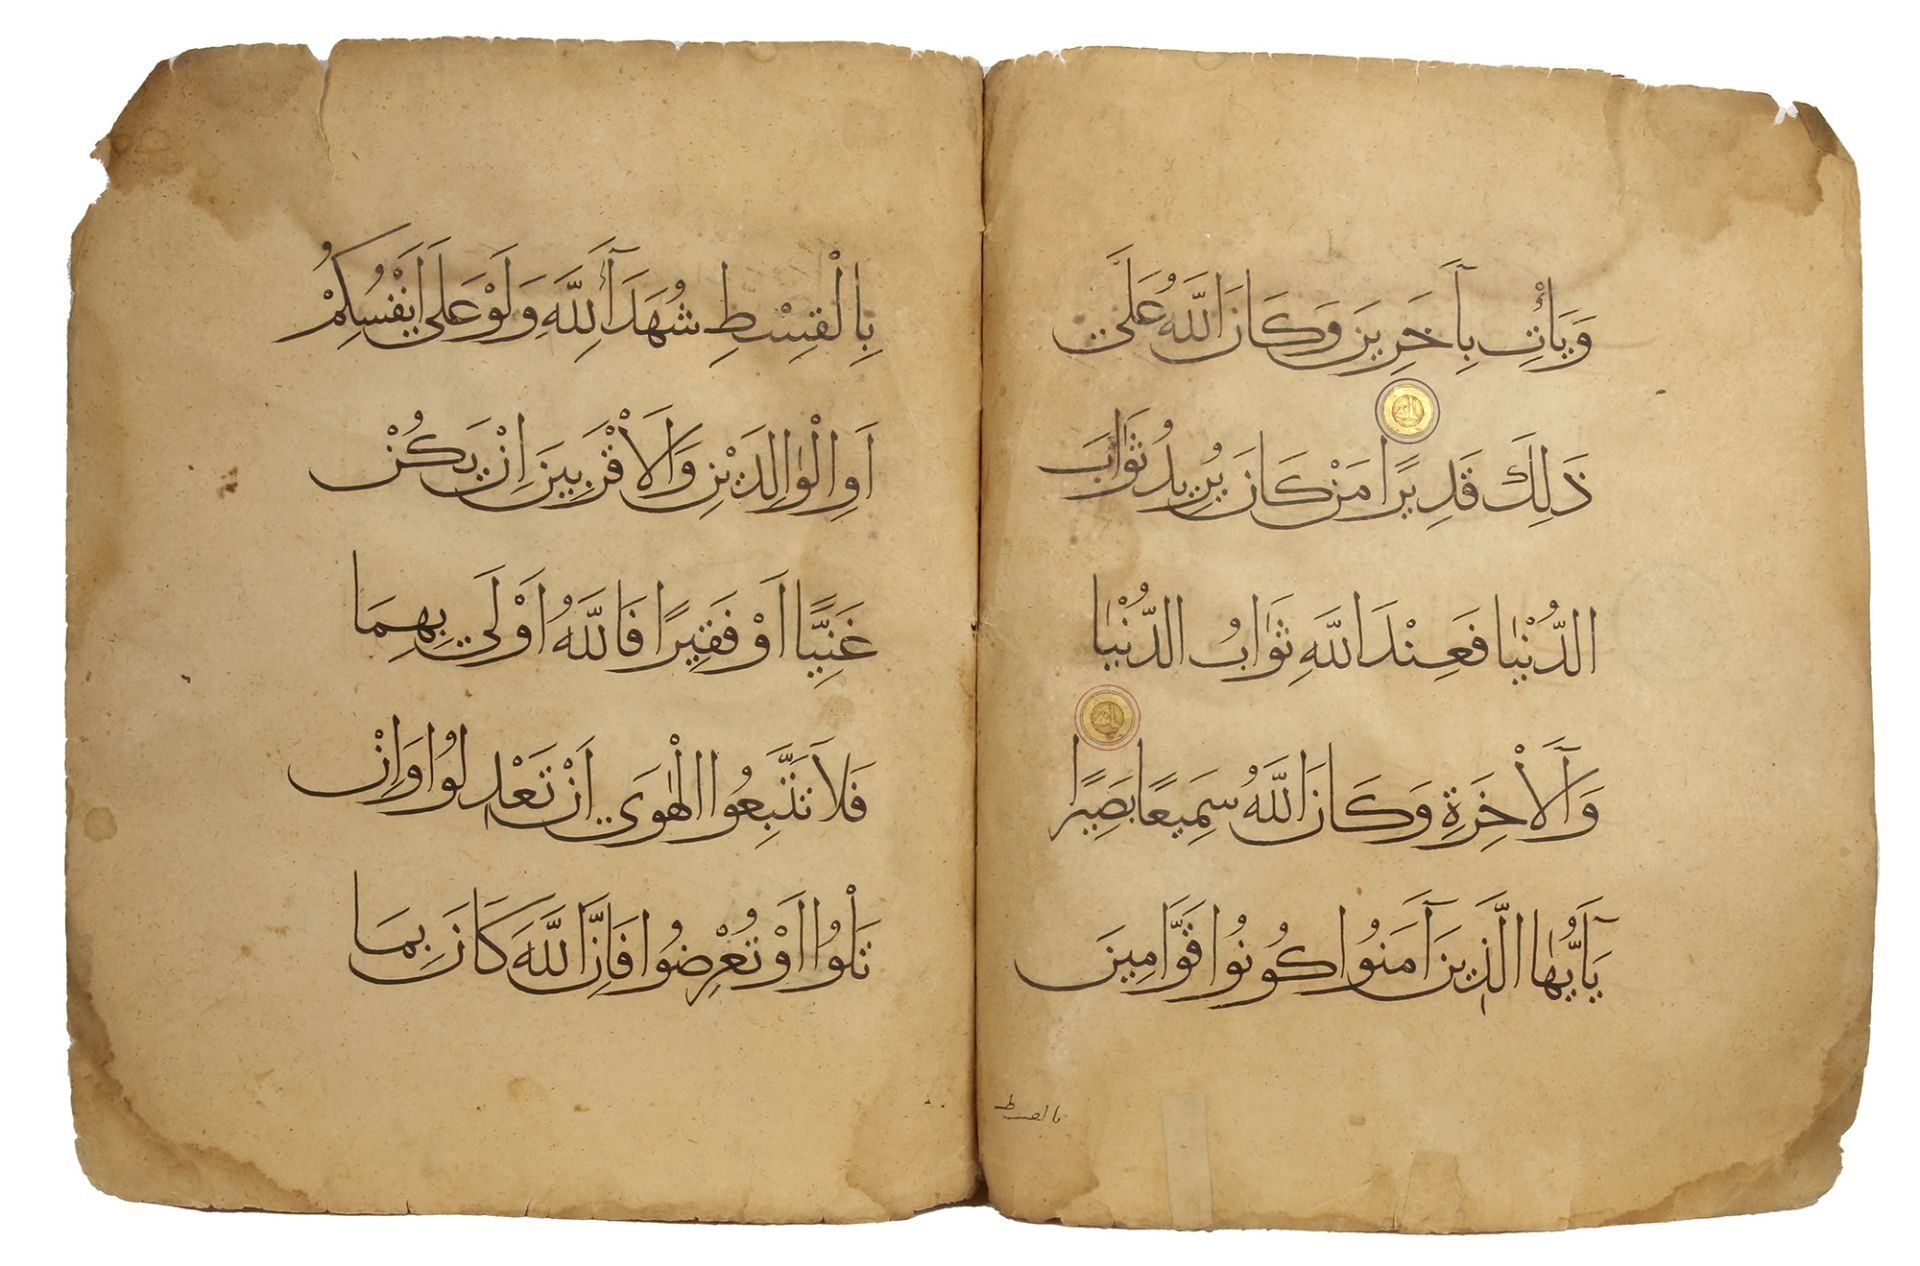 TWO LARGE MAMLUK QURAN PAGES, EGYPT OR SYRIA, 14TH CENTURY - Image 2 of 3